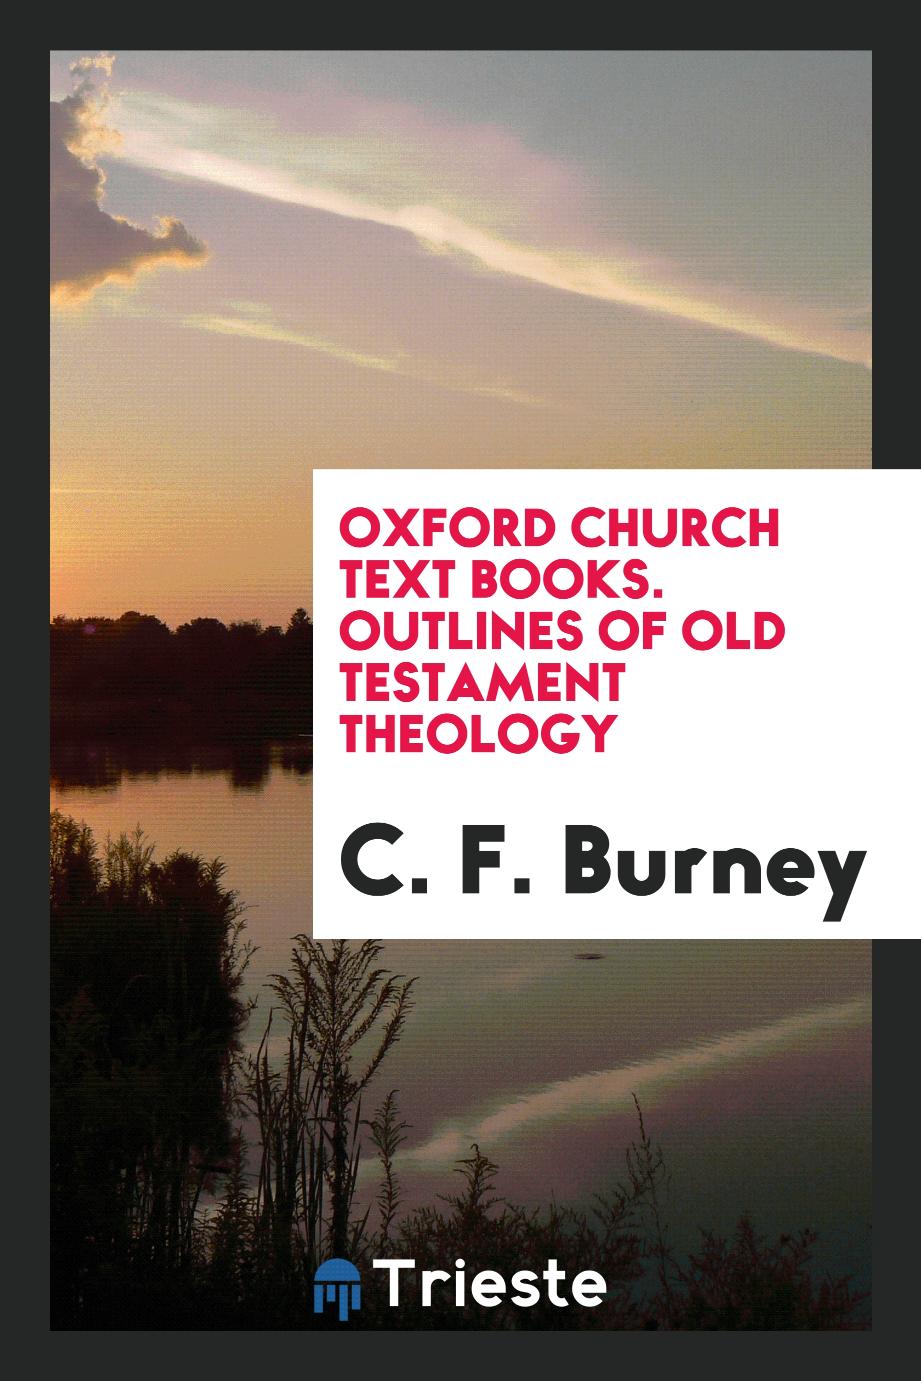 Oxford Church Text Books. Outlines of Old Testament Theology